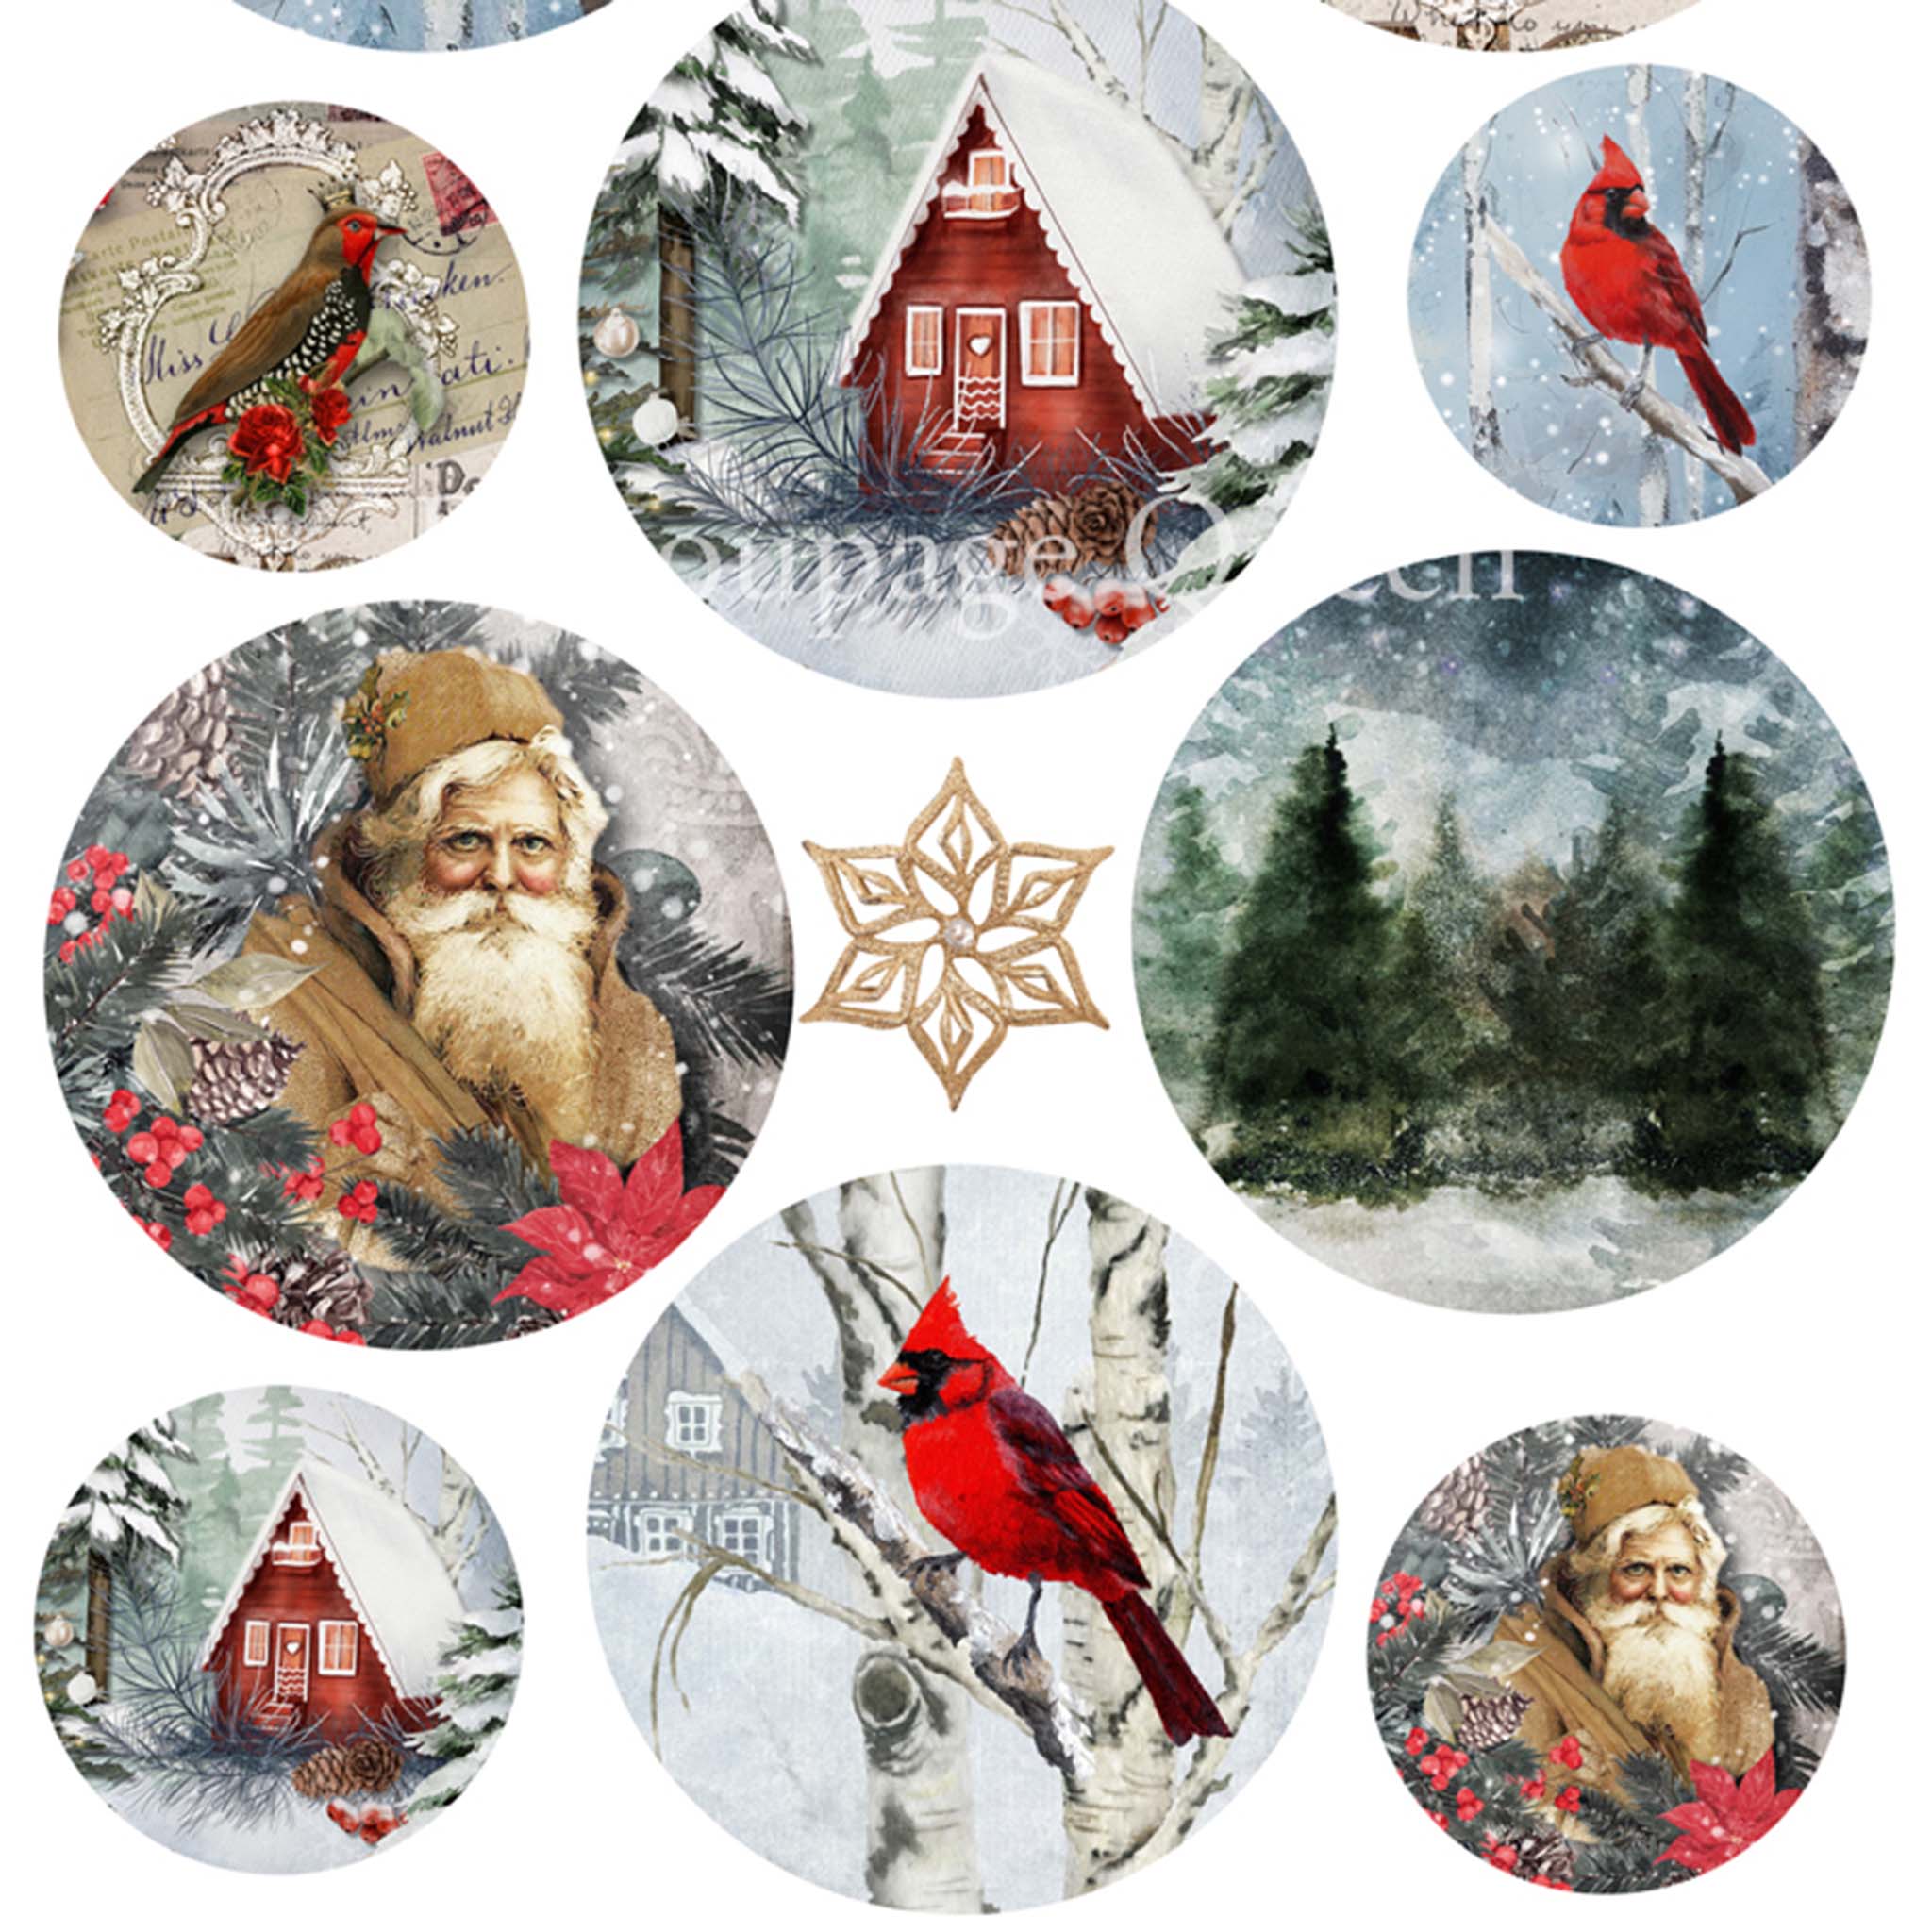 Close-up of an A3 rice paper design that features 10 beautiful circle ornament designs featuring cardinals, Santa, and classic winter scenes.